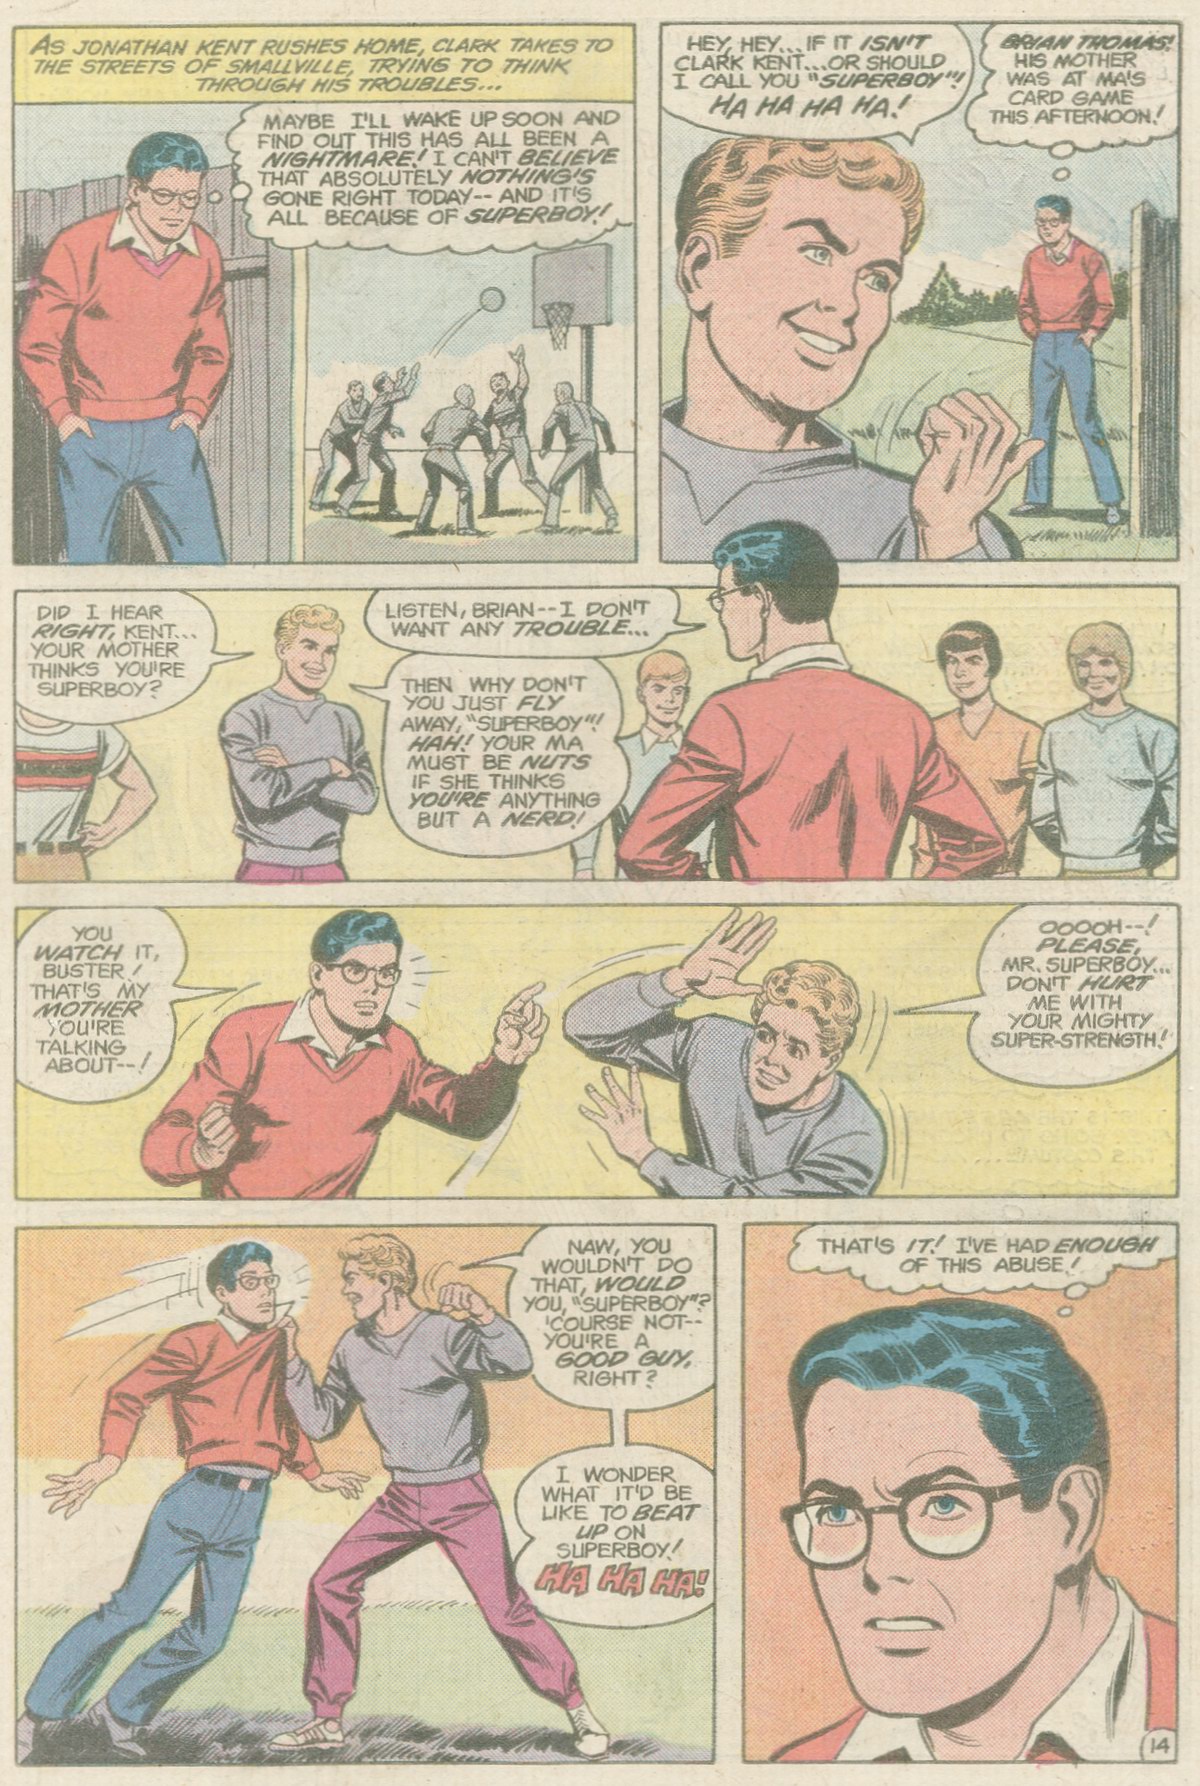 The New Adventures of Superboy 40 Page 14